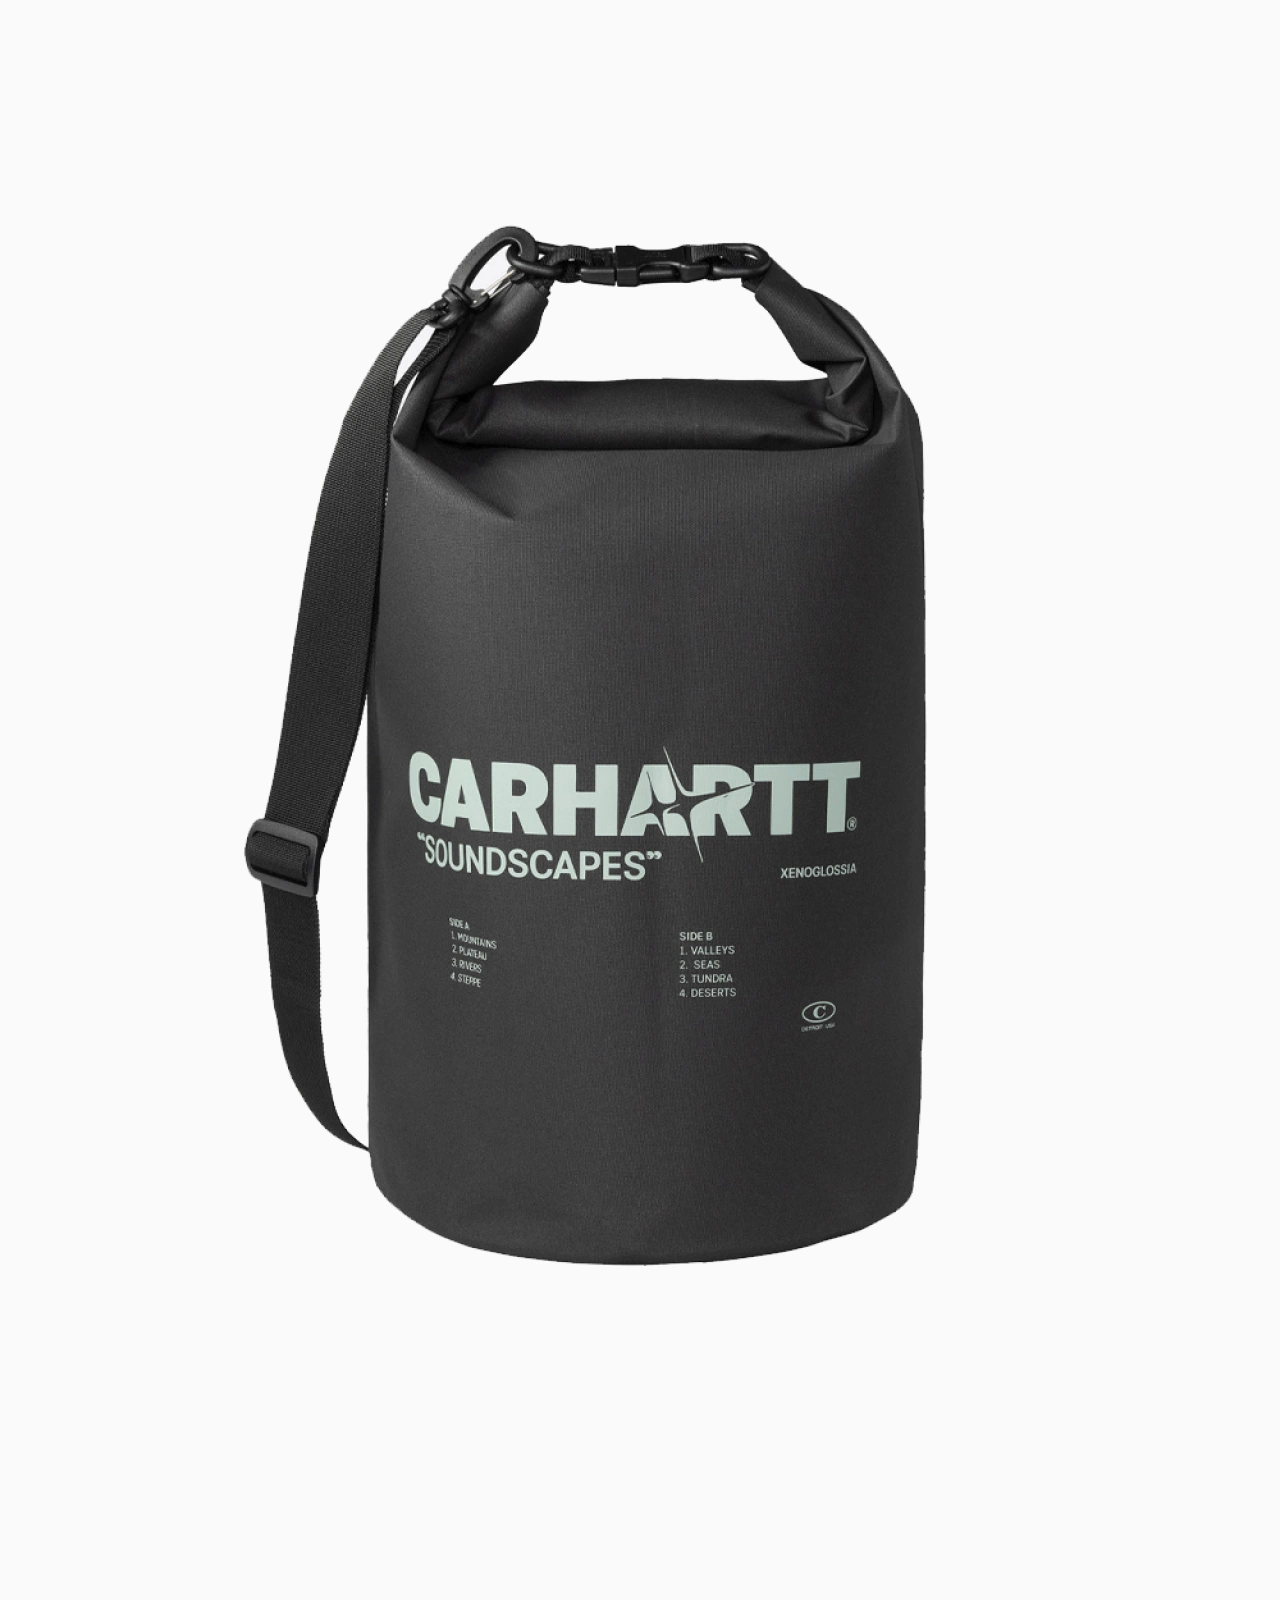 Carhartt Wip: Сумка водонепроницаемая Carhartt WIP Soundscapes Dry Bag